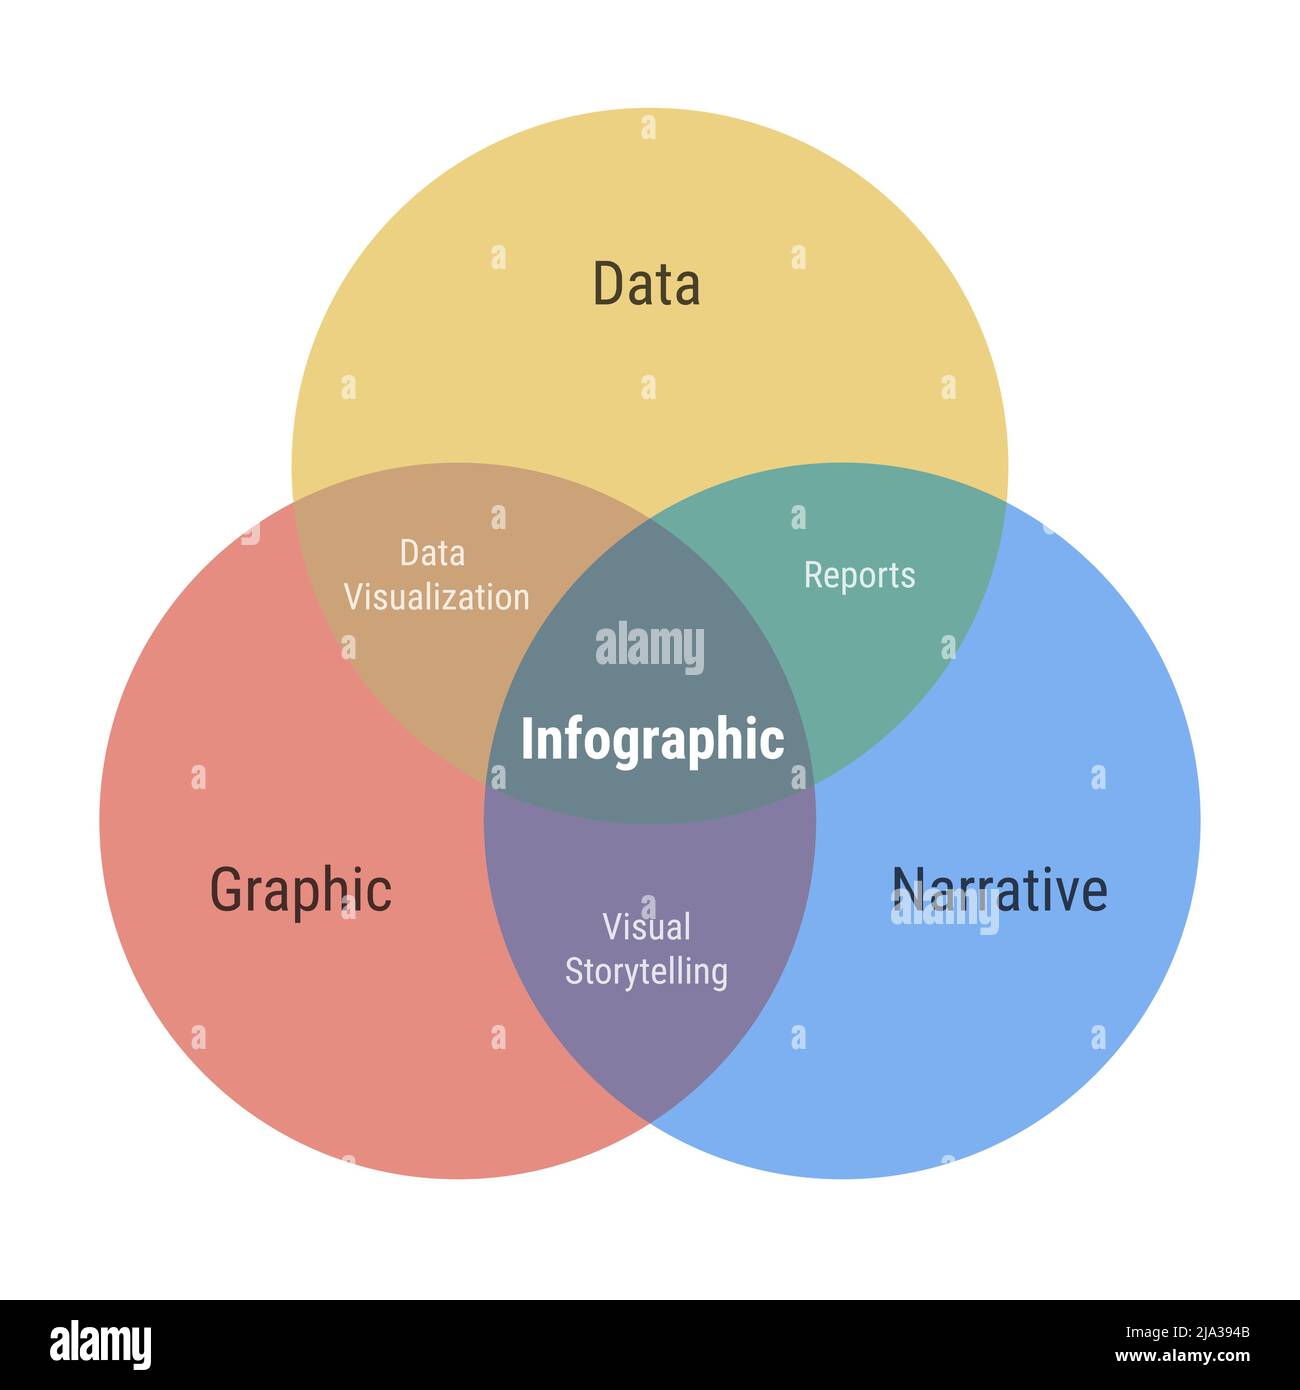 Infographic venn diagram 3 overlapping circles. Data visualization, narrative and graphic, reports and visual storytelling. Flat design yellow, red an Stock Vector